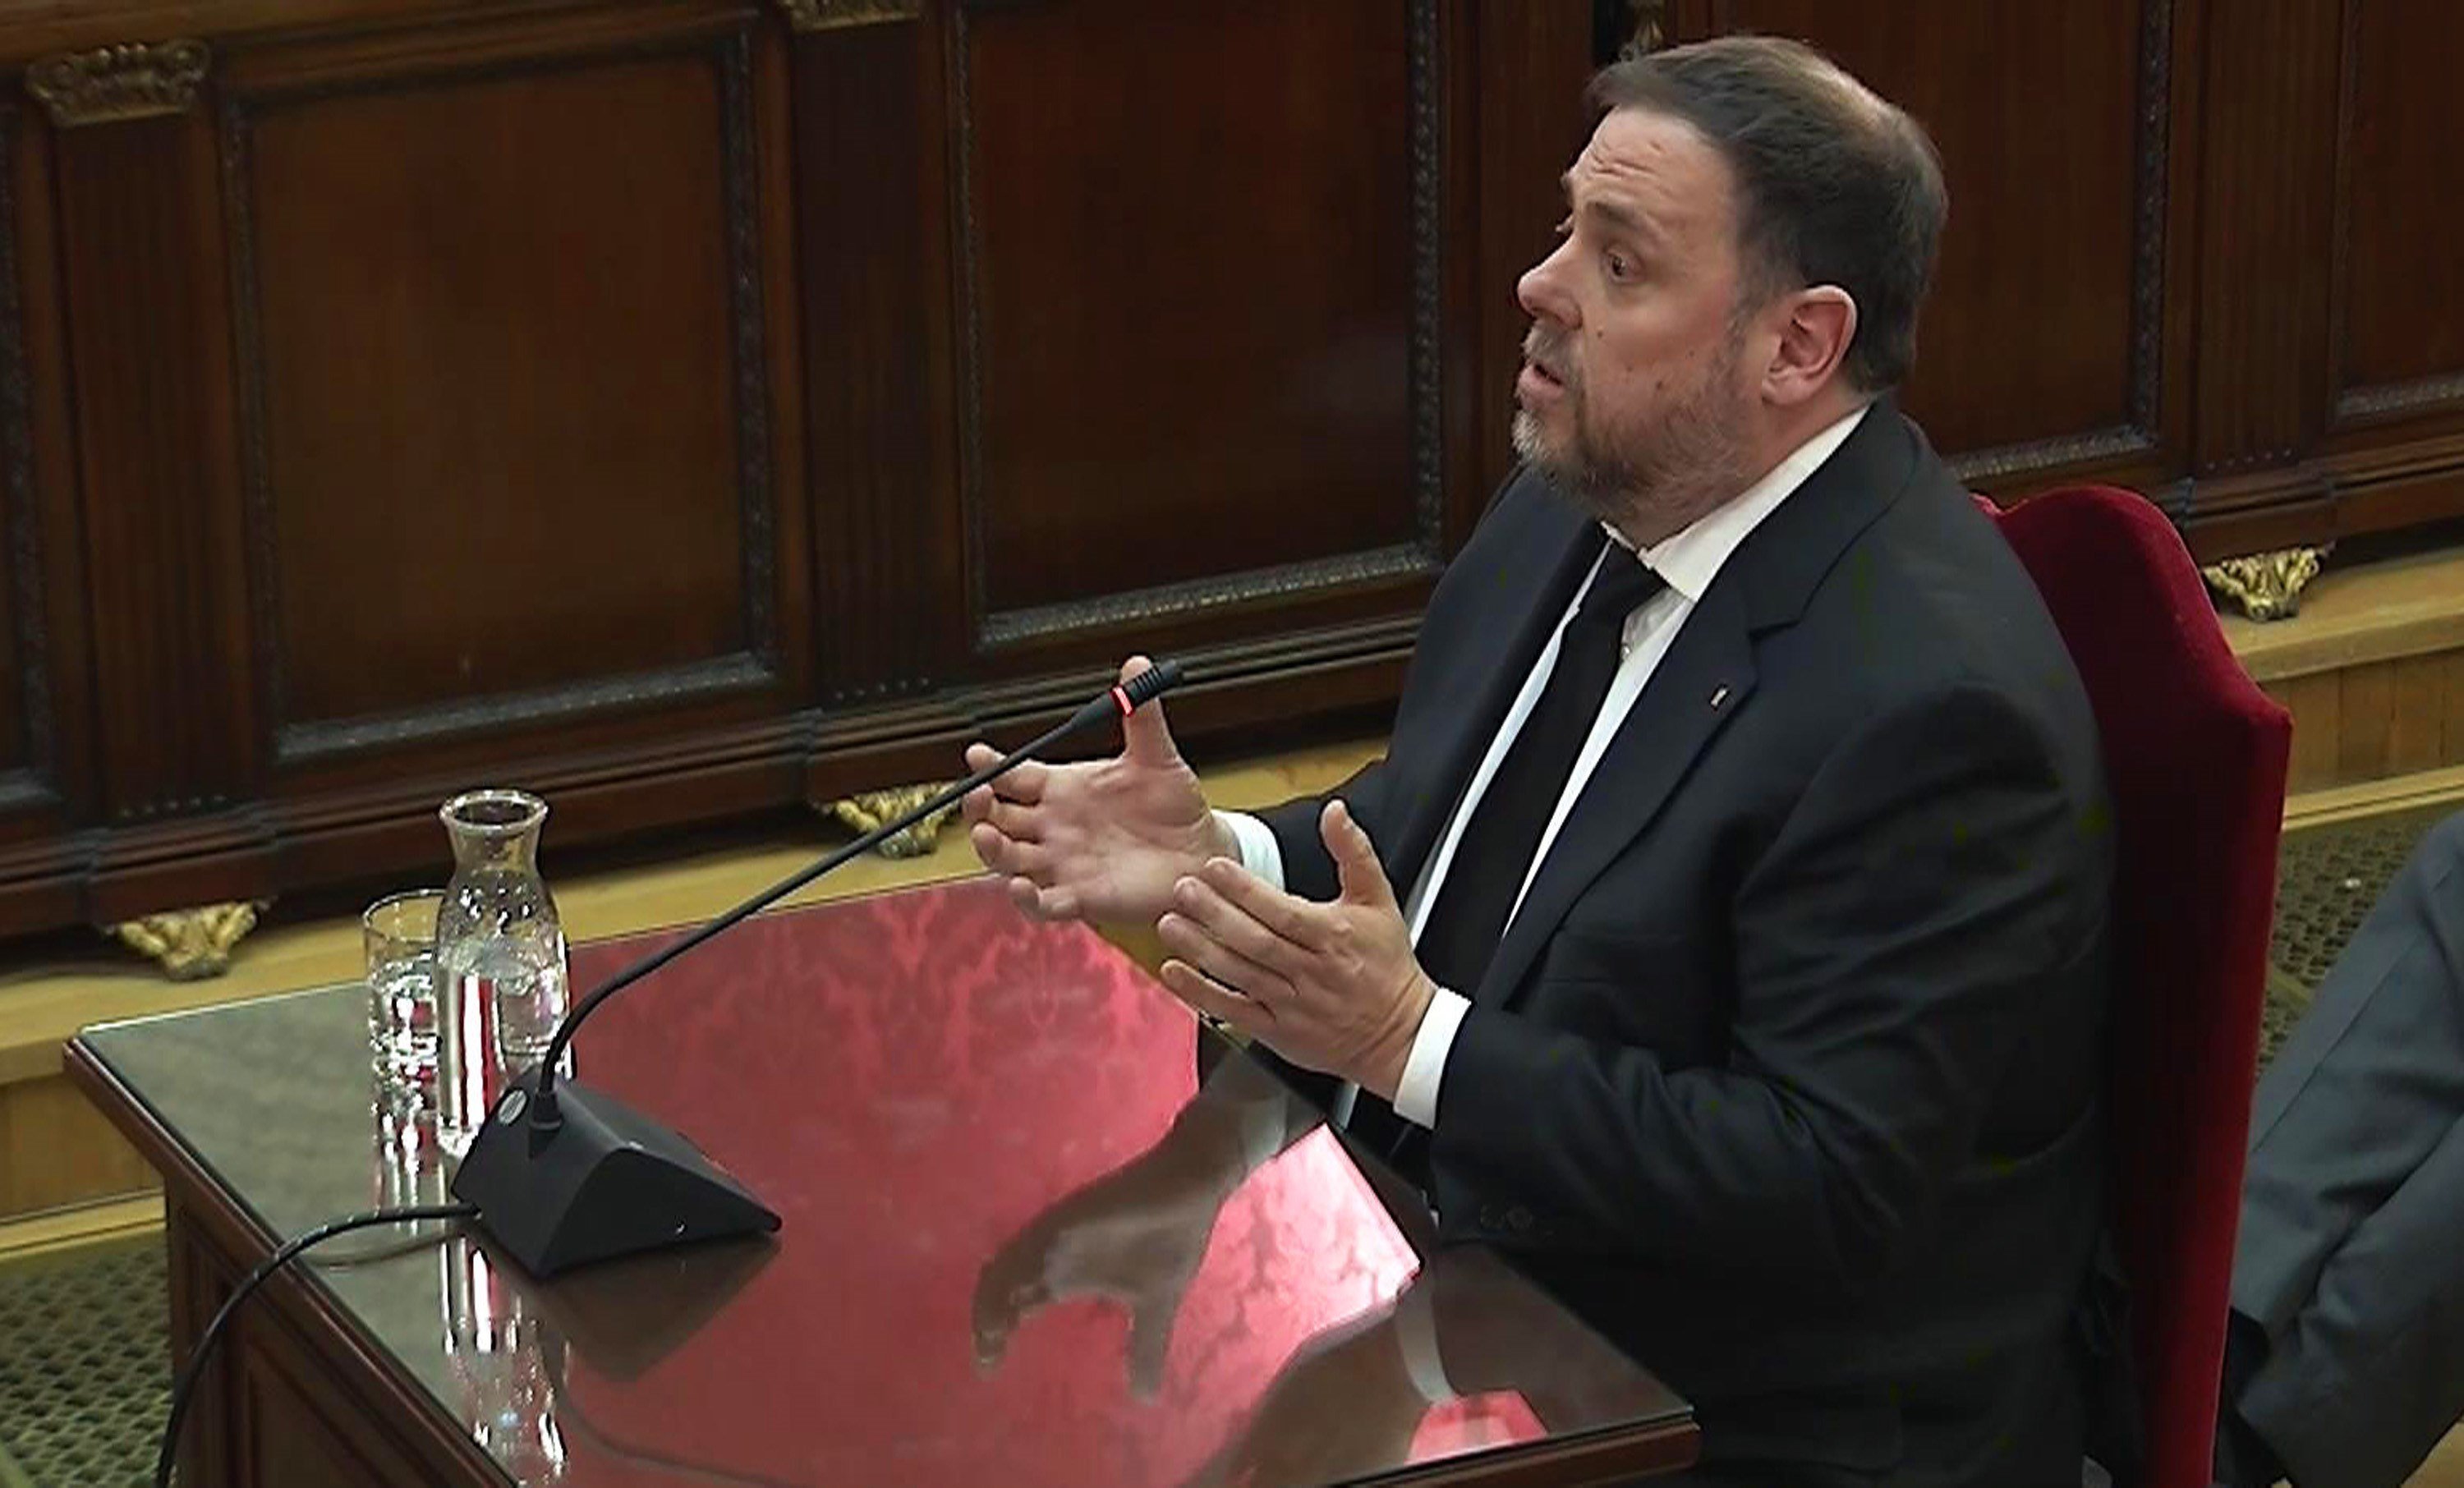 Oriol Junqueras, no regrets in Catalan independence trial: "We'll continue trying"